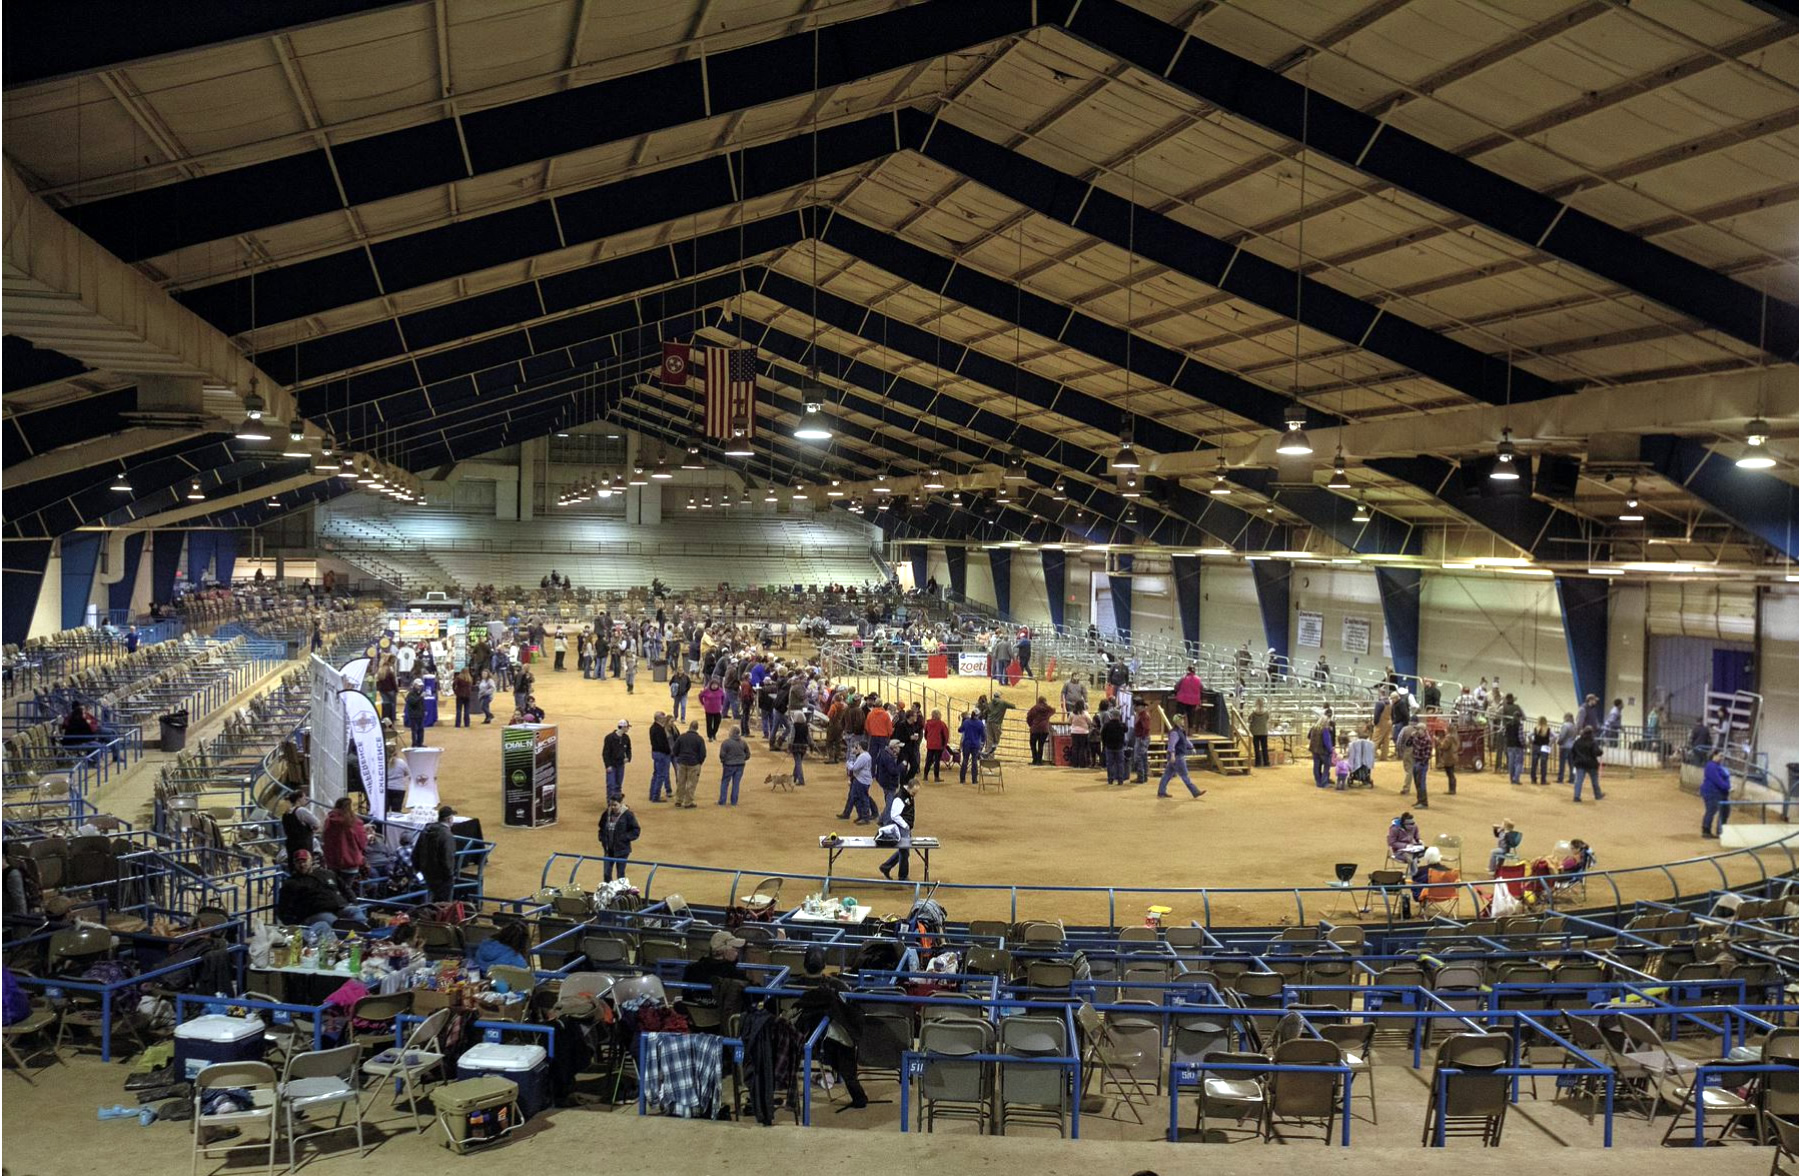 Looking from the stands at the state swine show